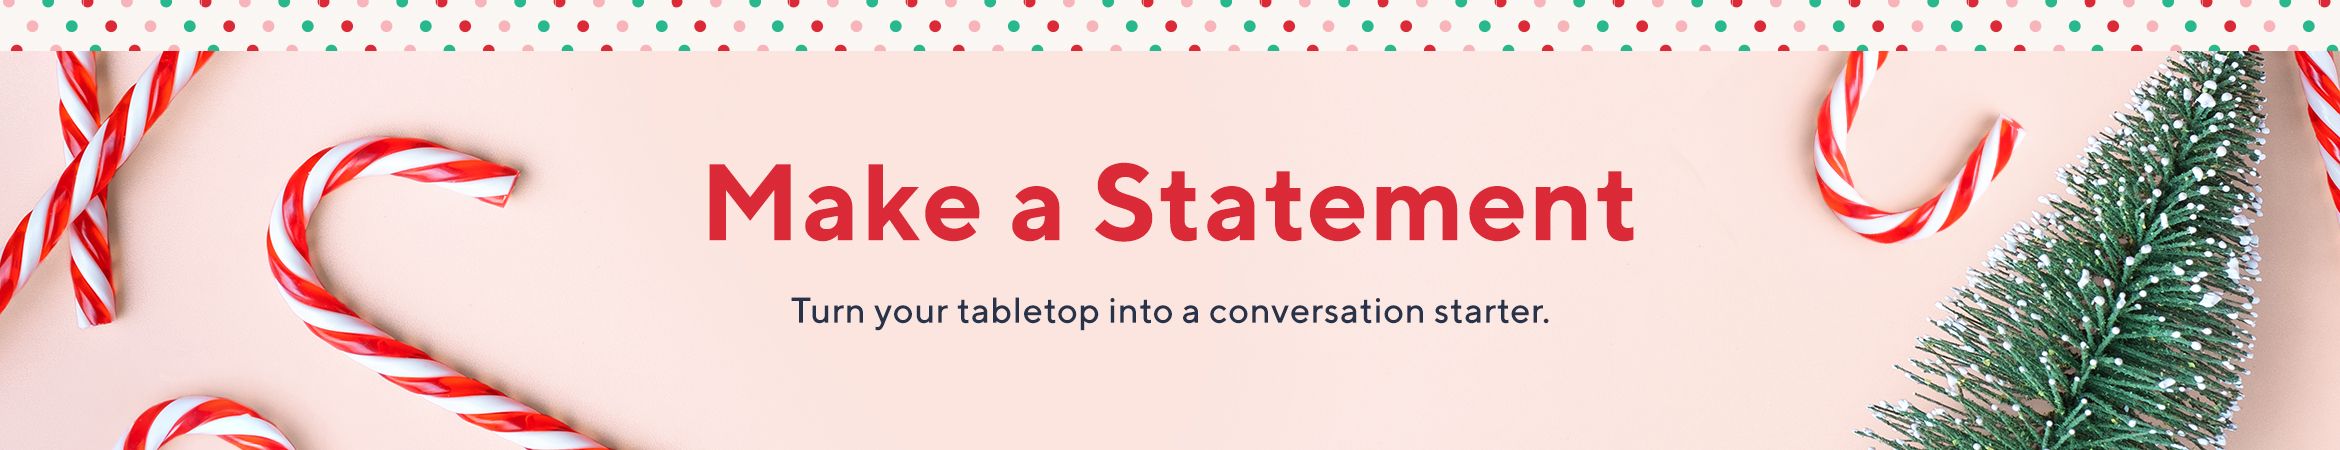 Make a Statement - Turn your tabletop into a conversation starter.